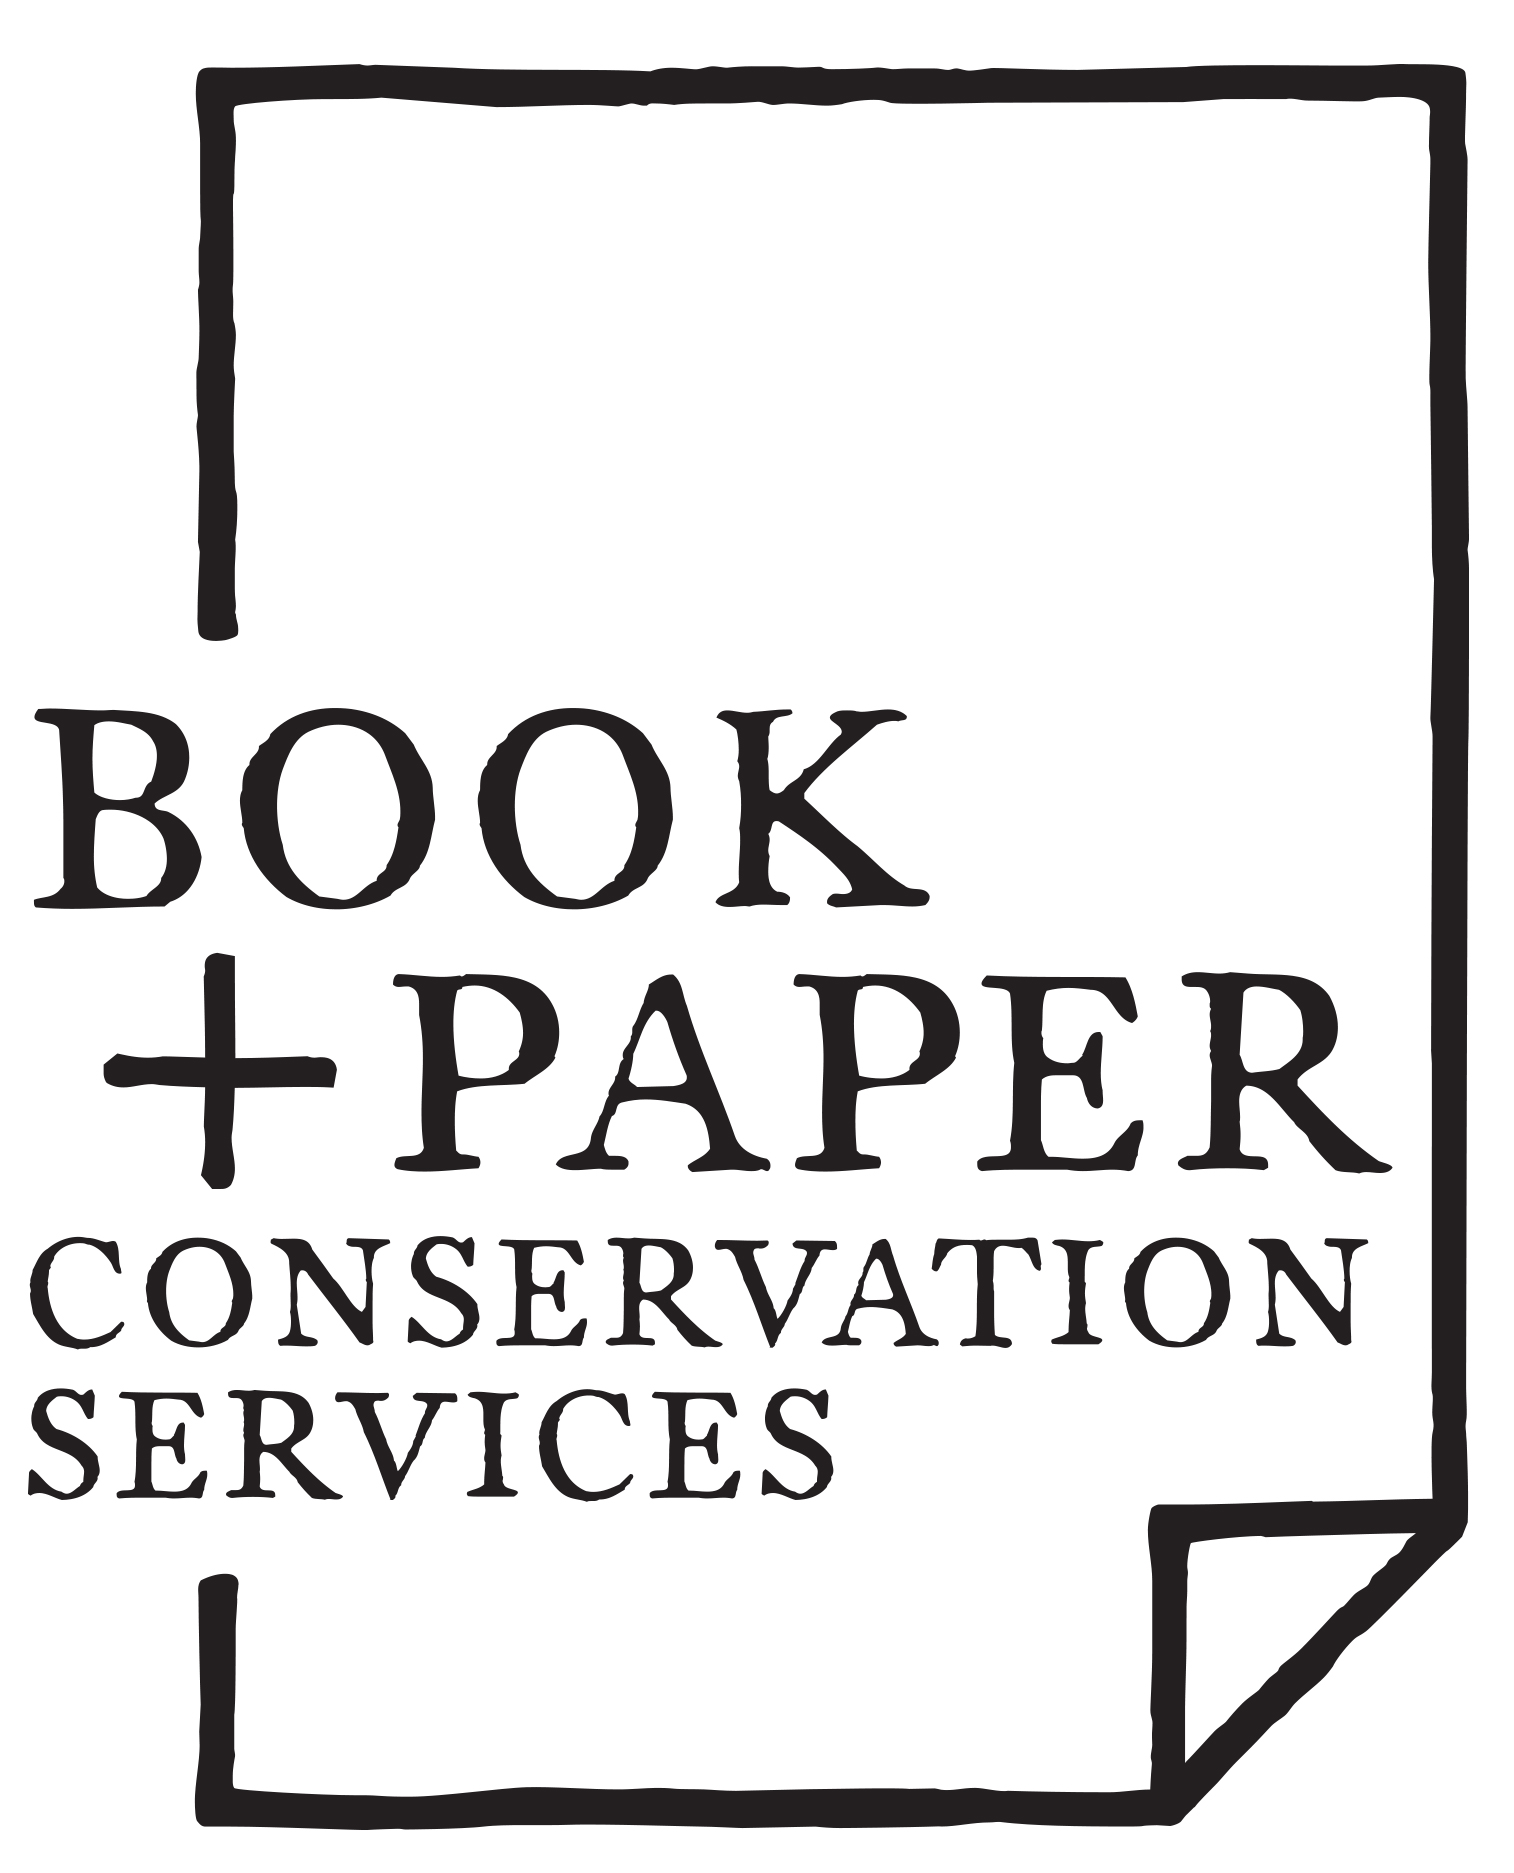 Book and paper conservation services logo. 